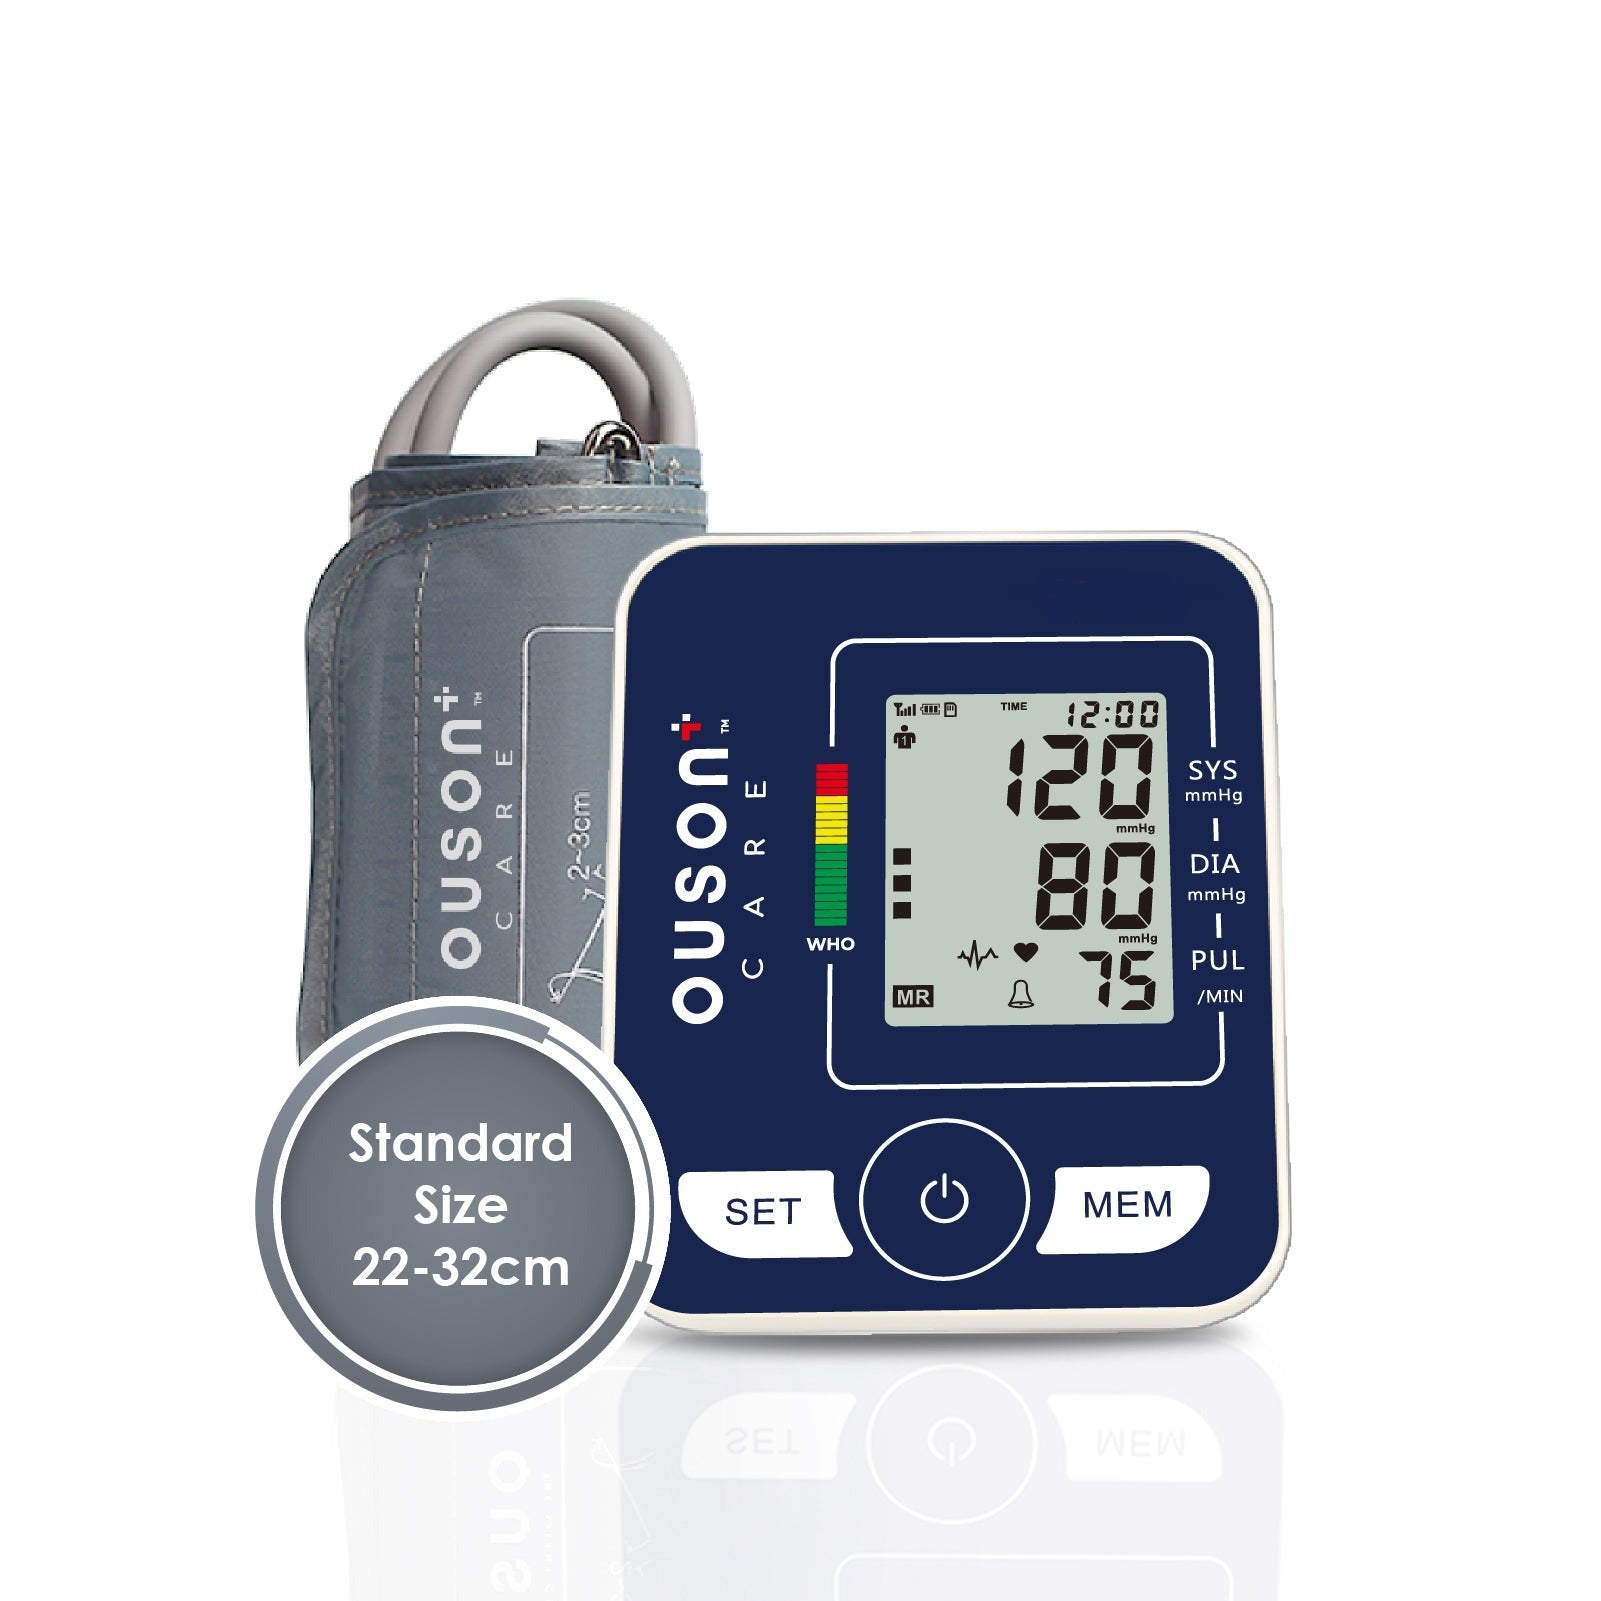 Ouson Care Arm Type Electronic Blood Pressure Monitor [BSX556]